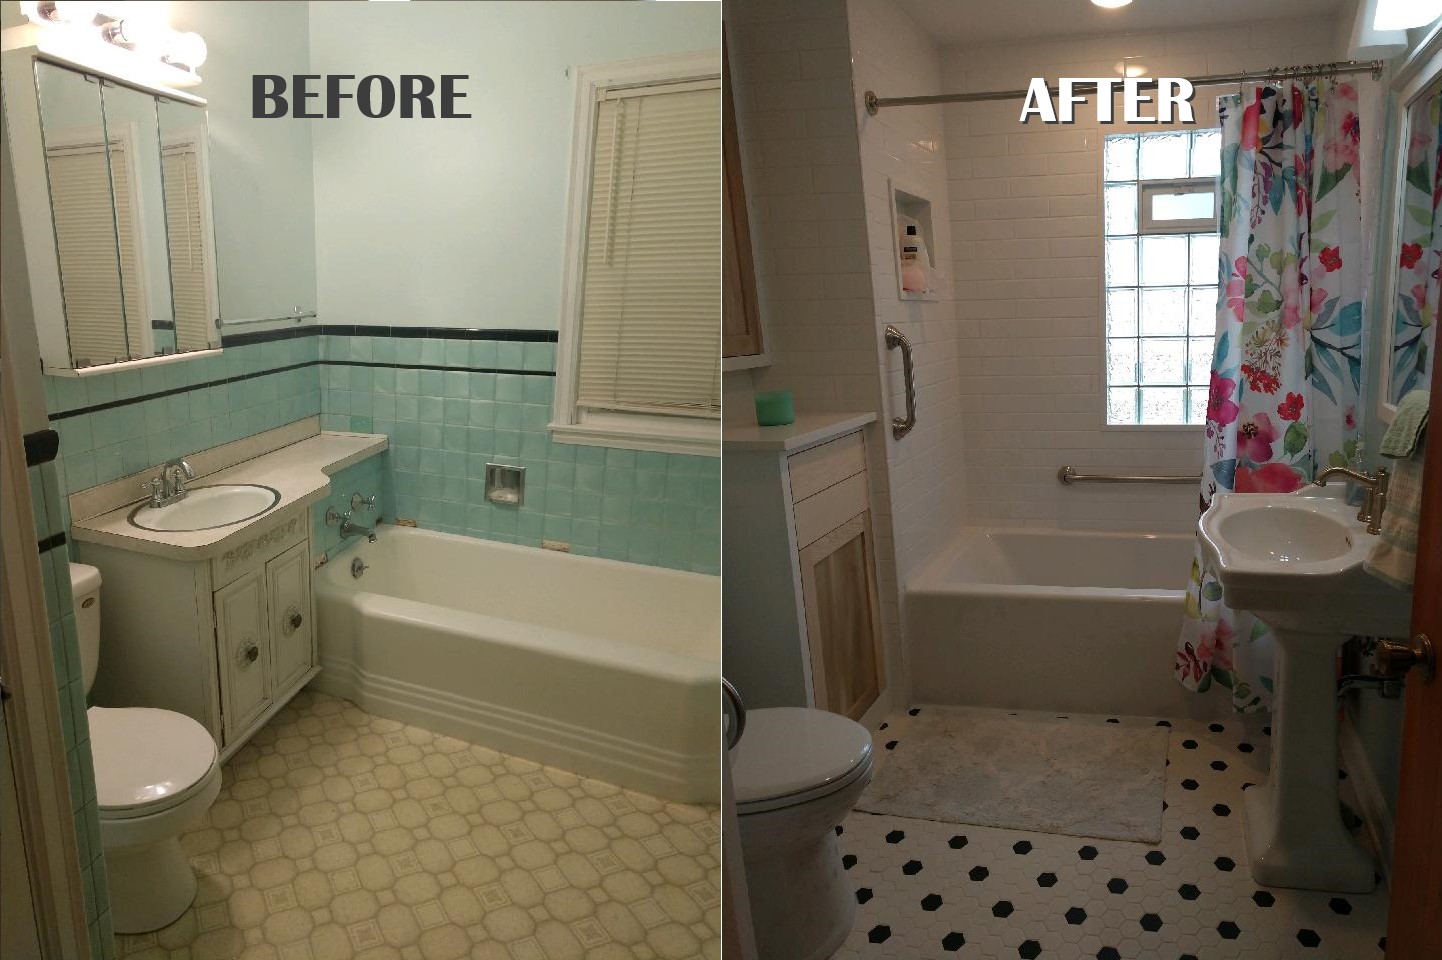 Columbia Heights Bathroom Tile Remodel Before and After!